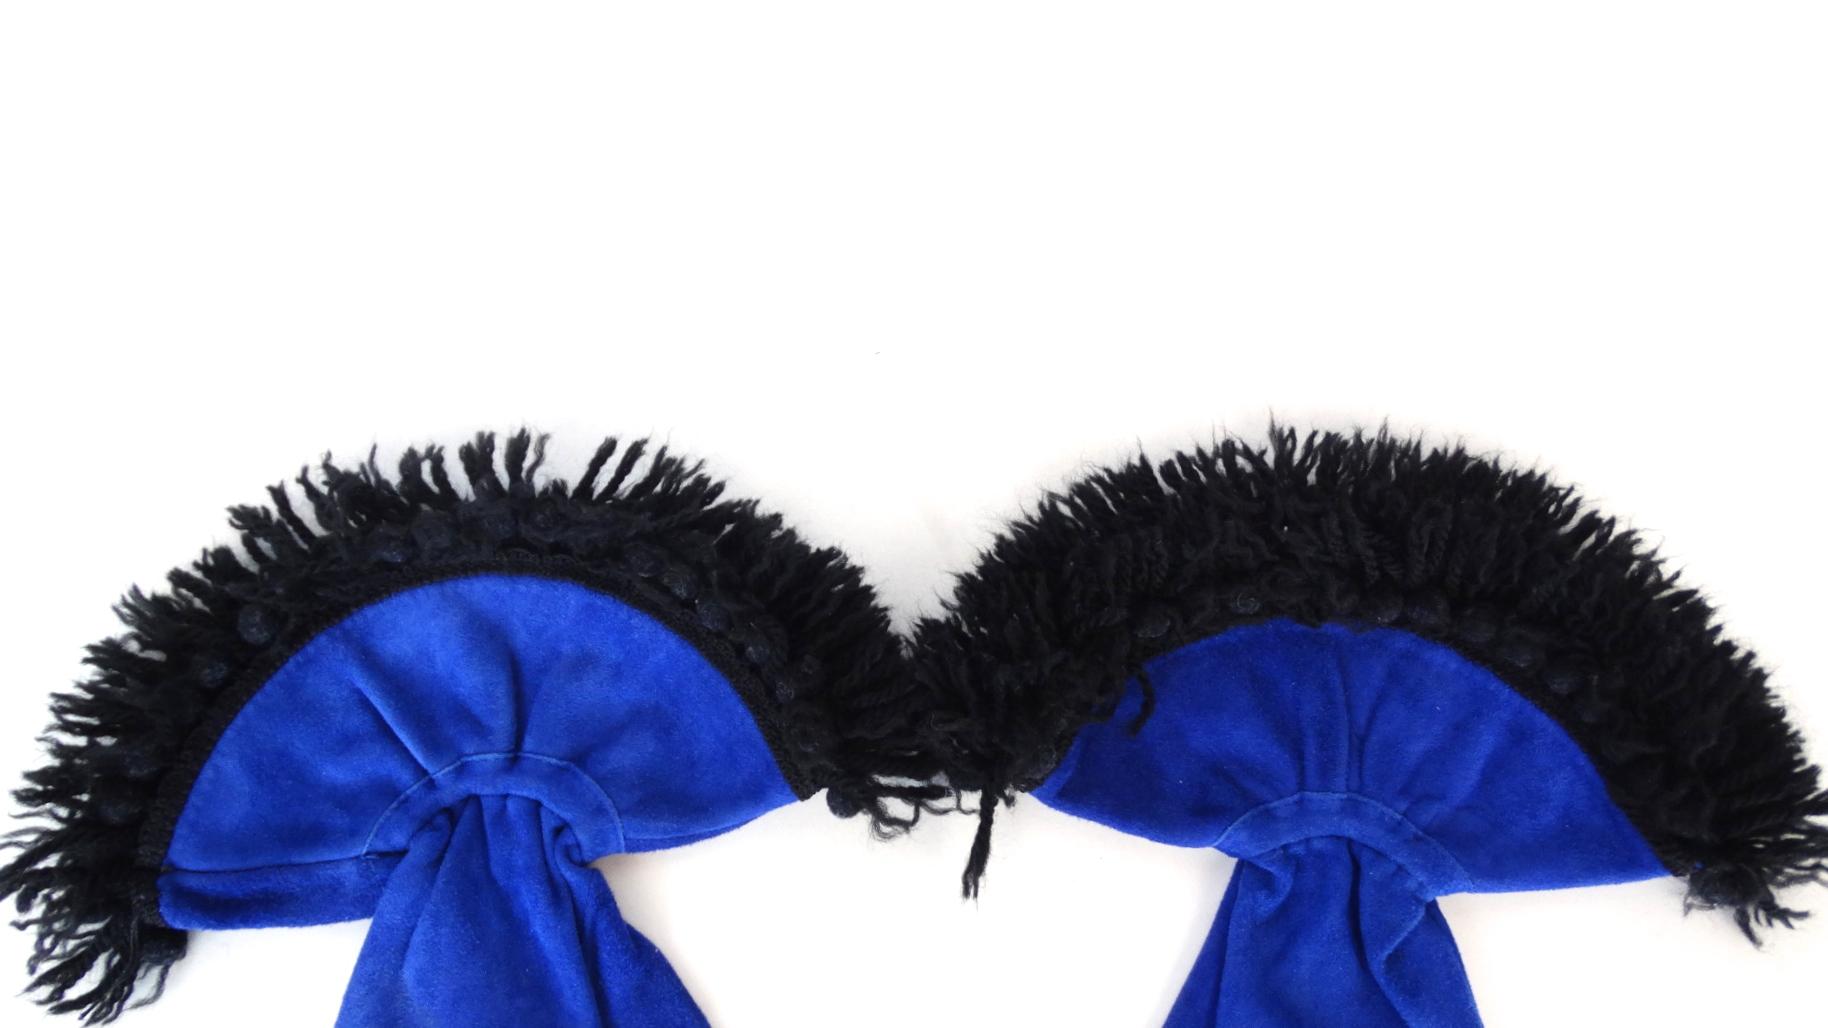 Stay Stylish During The Fall/Winter Seasons With These Amazing Gloves! Circa 1980s, these suede gauntlet style gloves are a beautiful royal blue color. Features a decorative trim made of black yarn. An elastic band cinches at the wrist for a